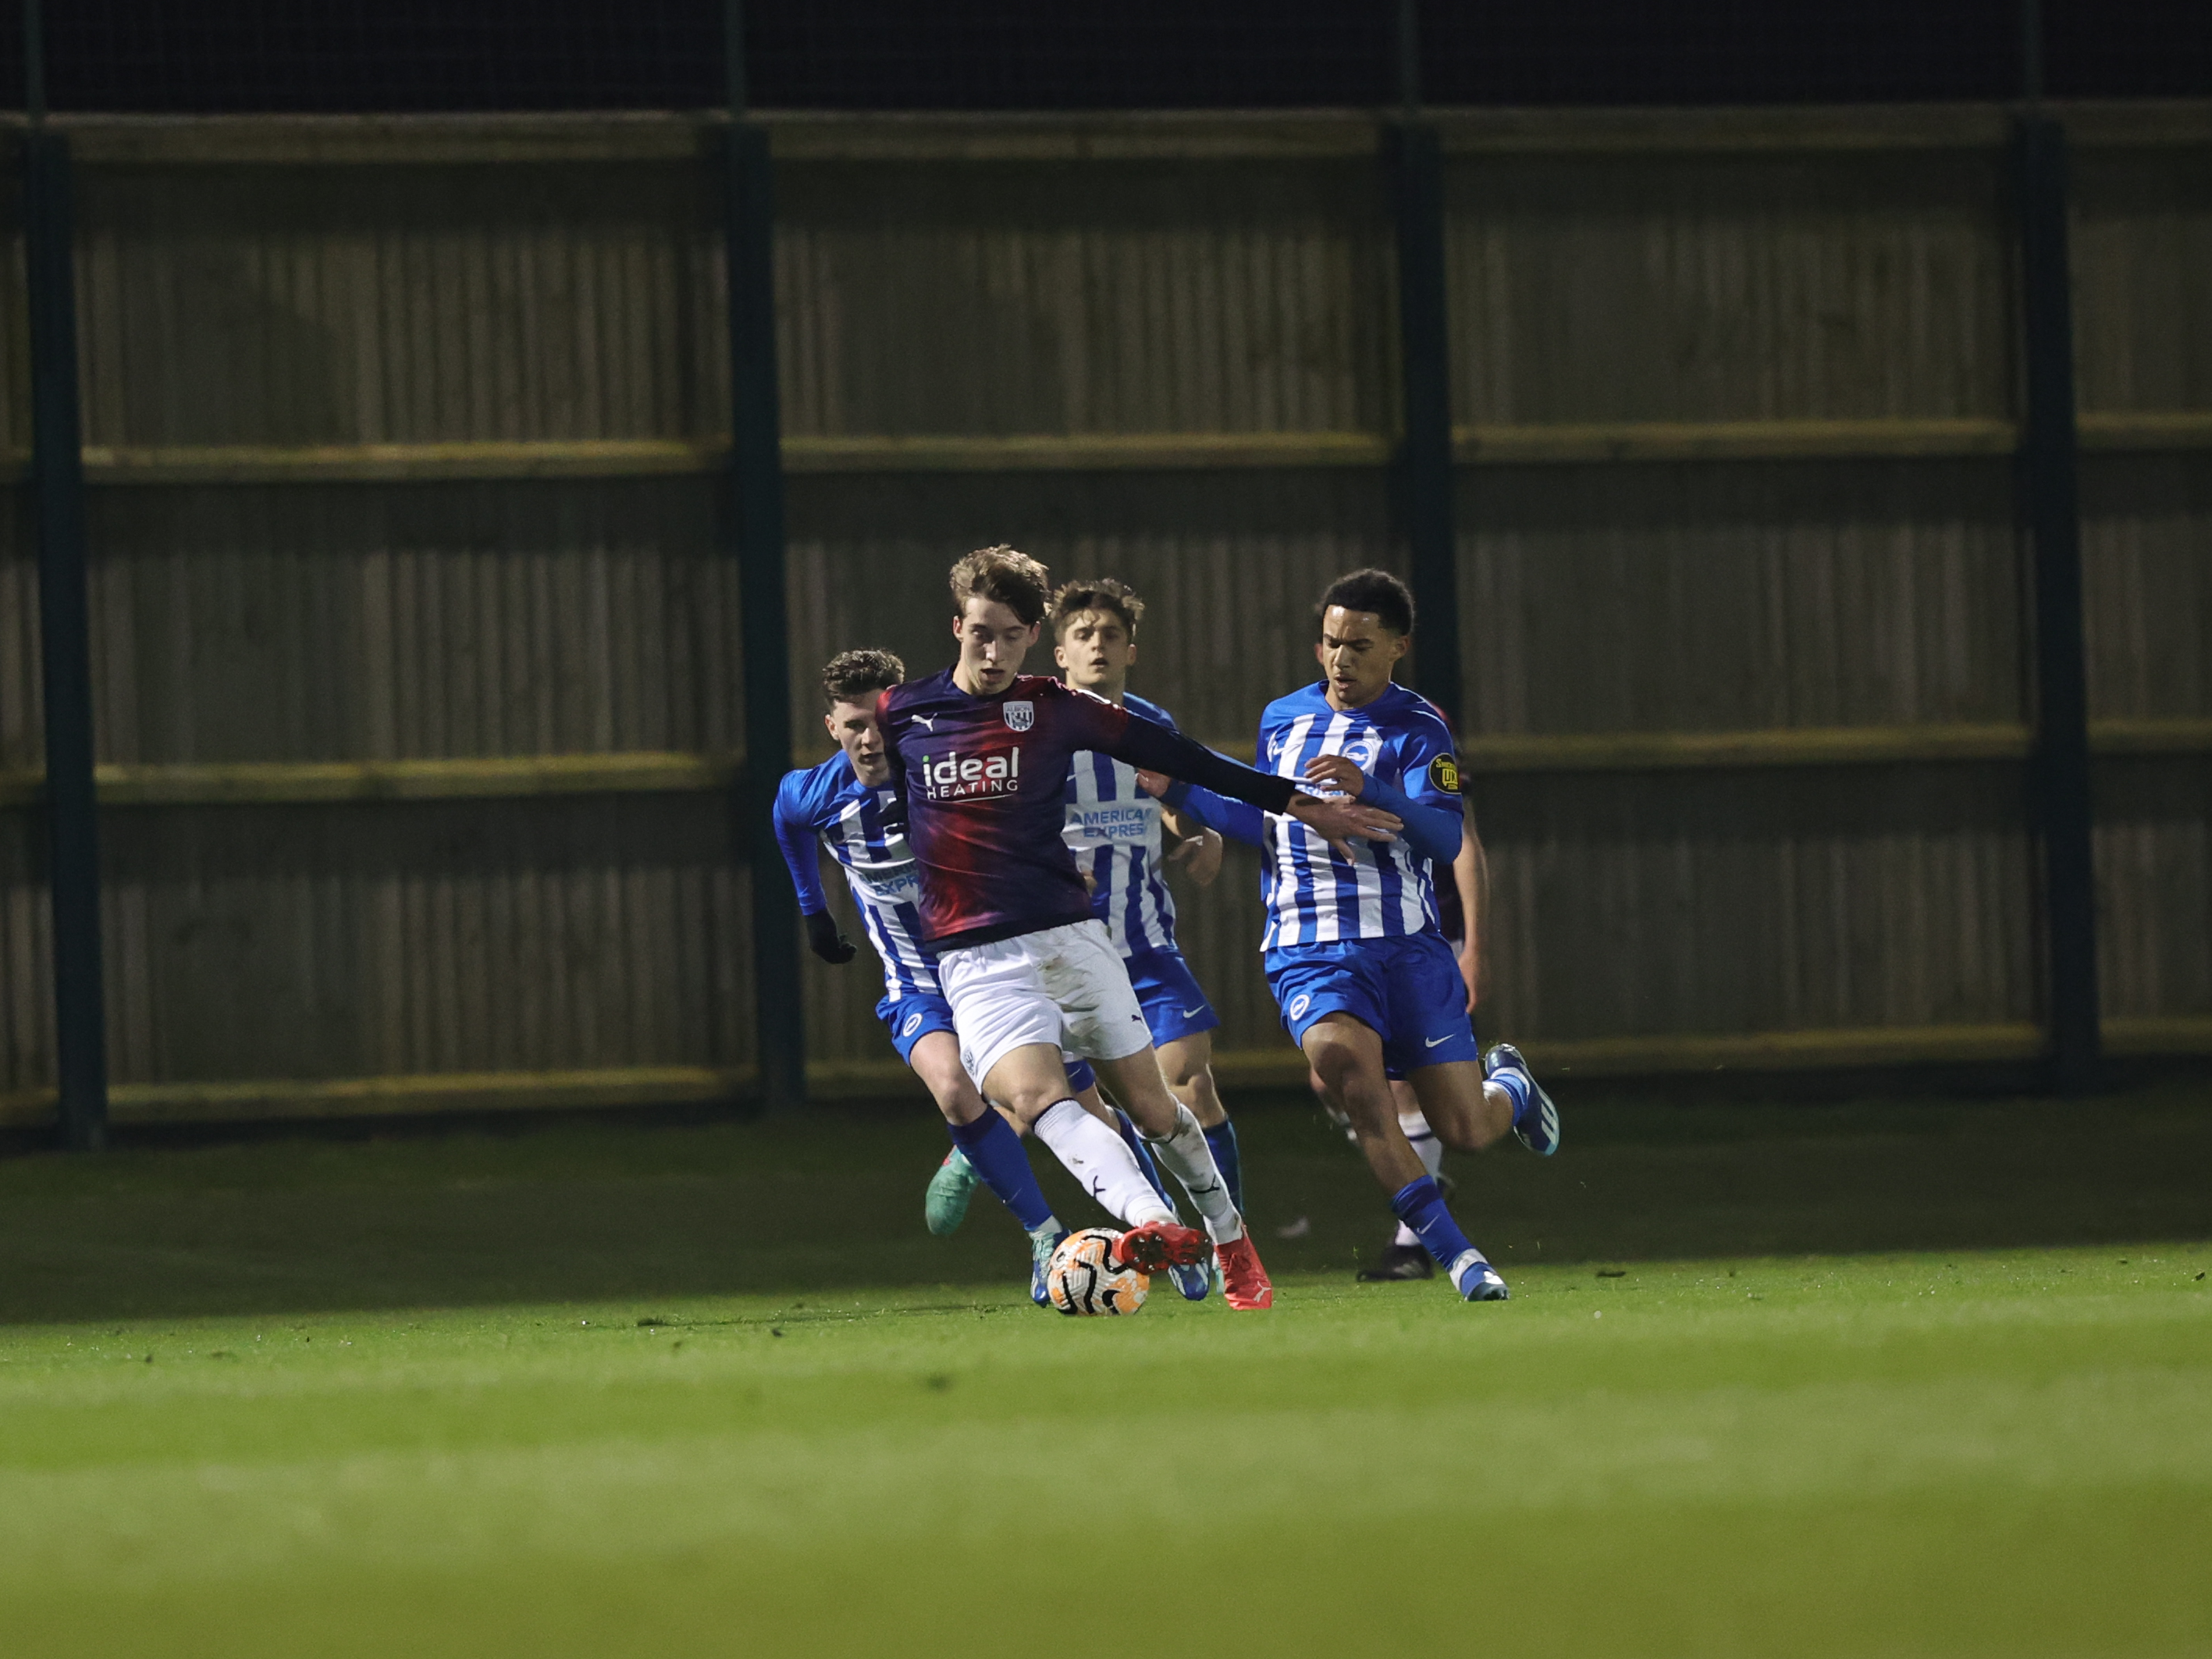 A photo of Harry Whitwell on the ball during Albion's PL2 match v Brighton